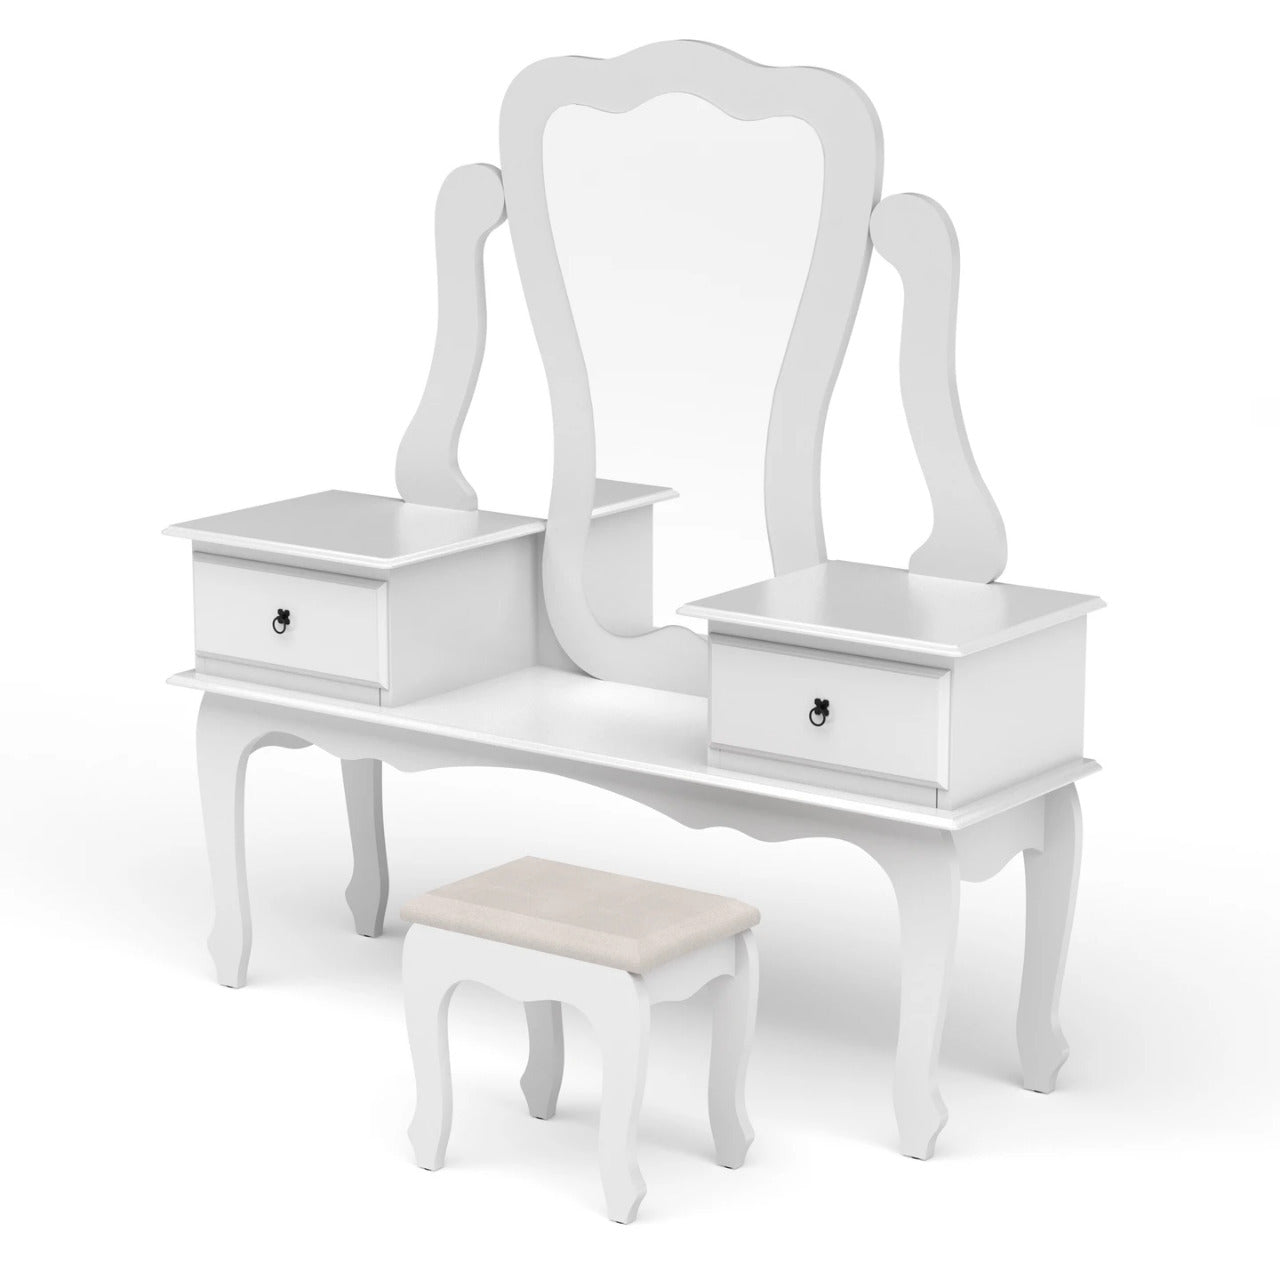 Makeup Vanity: Gian Vanity with Bench, White & 02 drawers